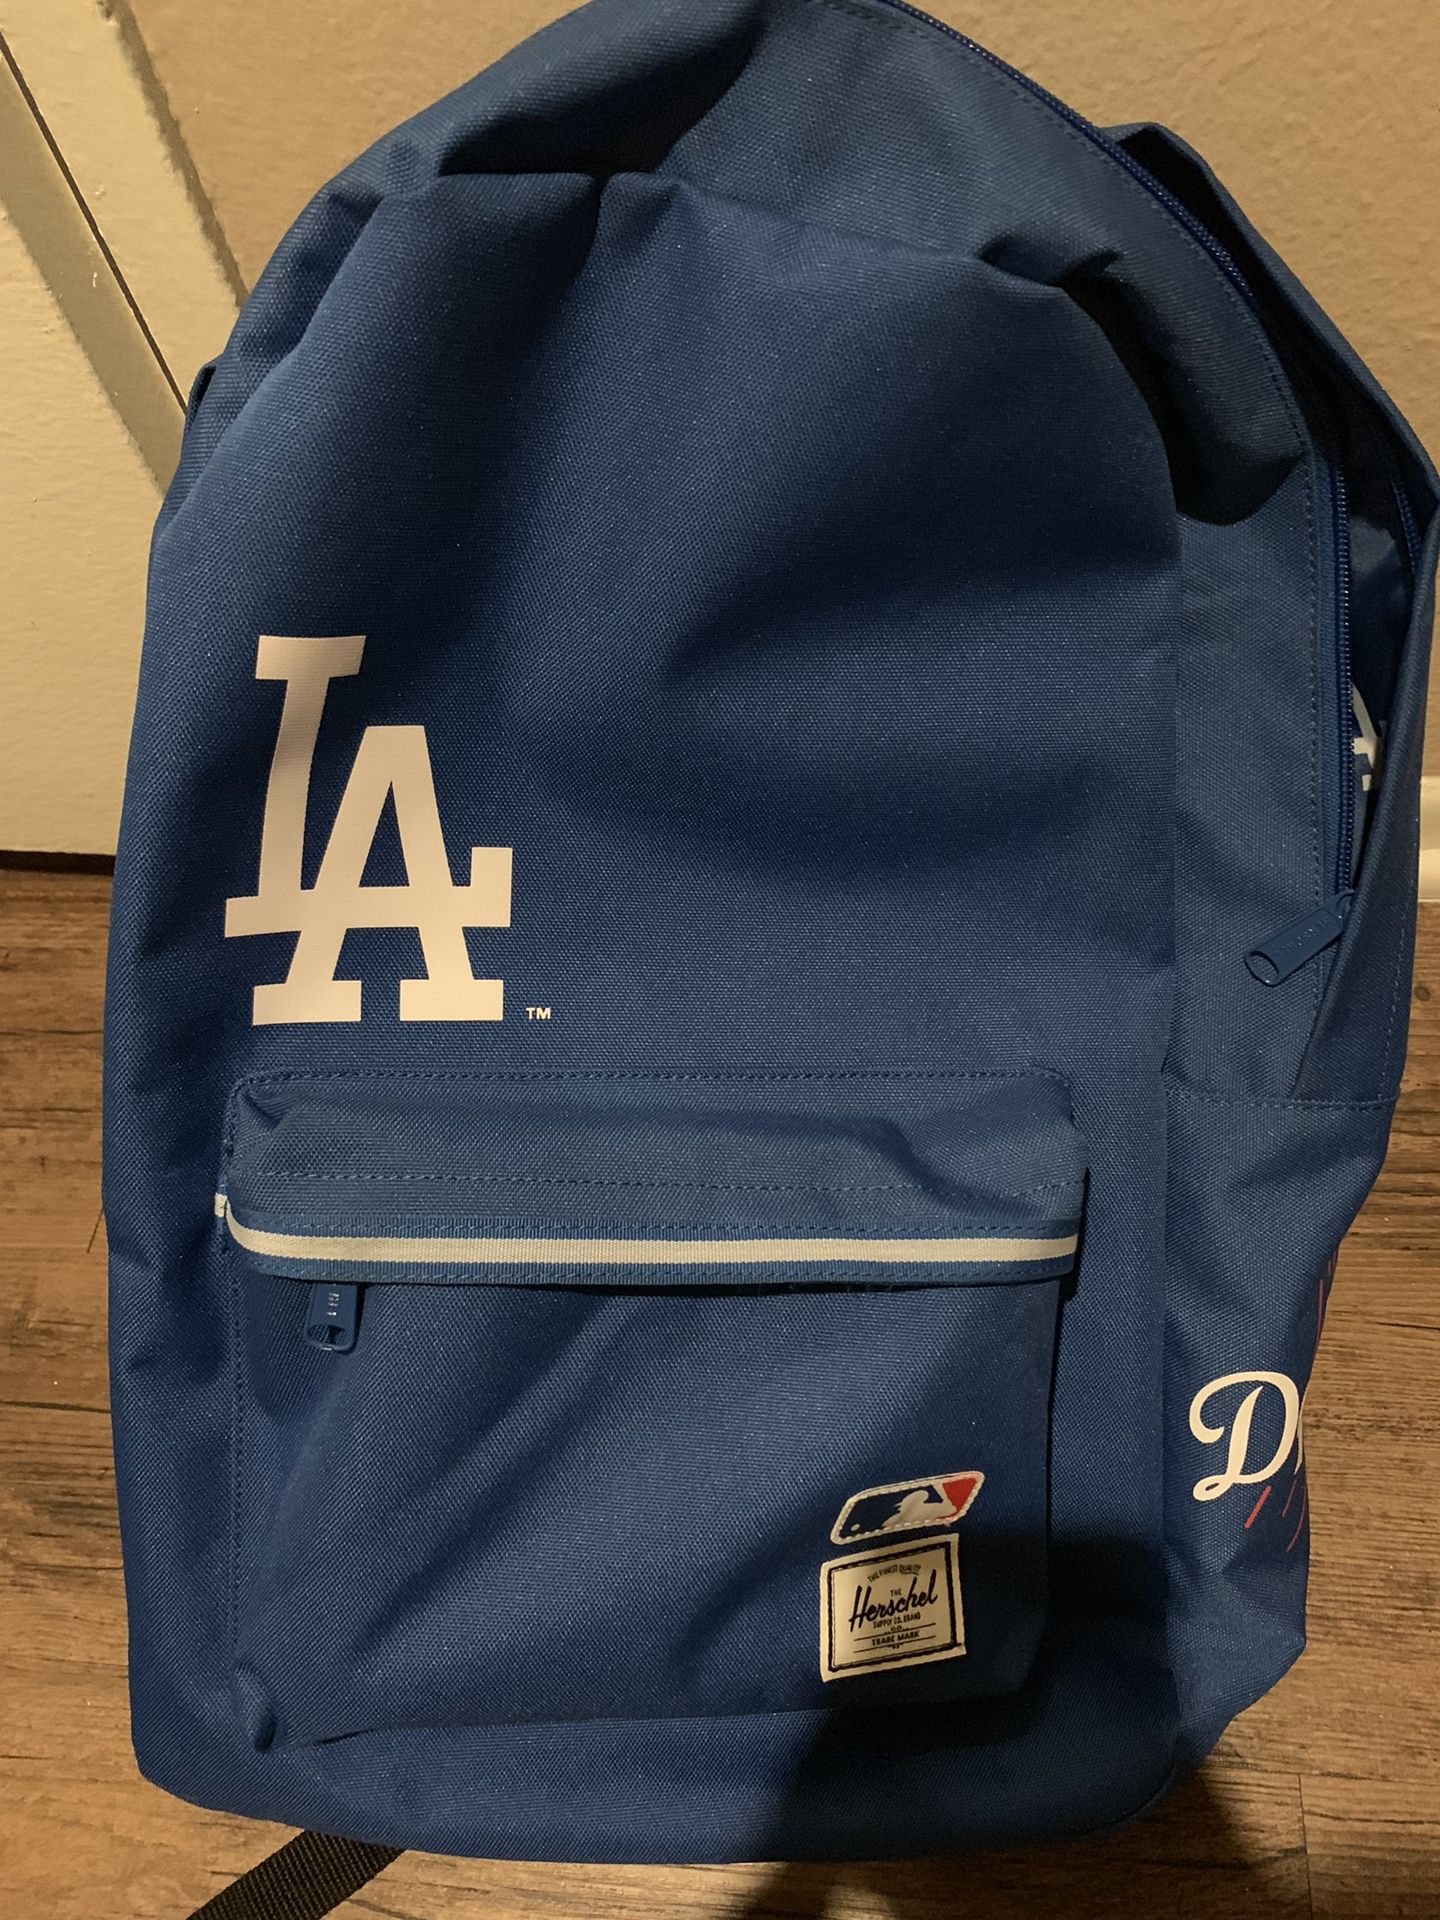 Clear Dodger Backpack Heavy Duty for Sale in Los Angeles, CA - OfferUp